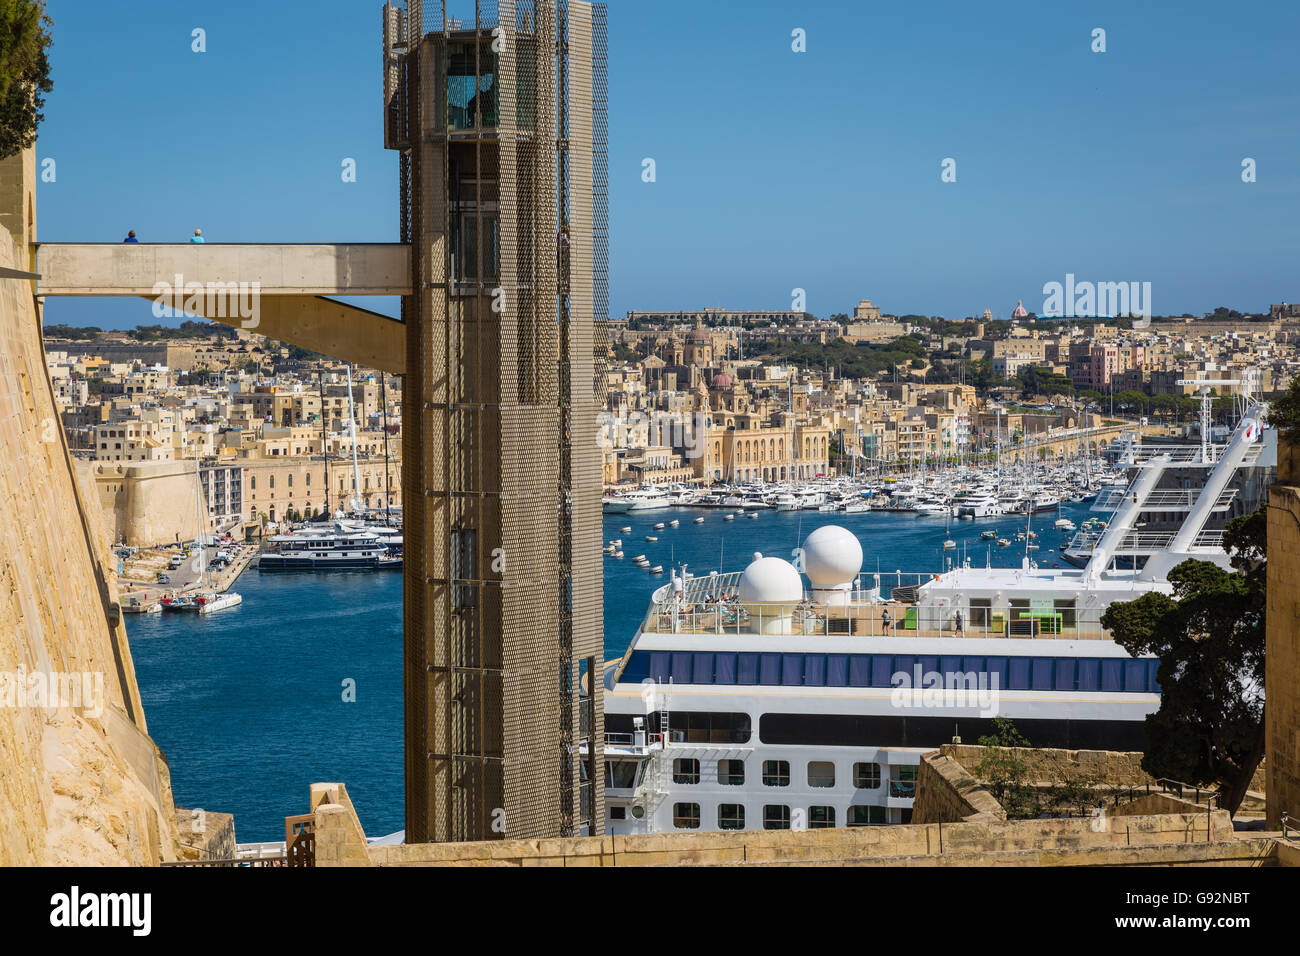 Valletta, Malta - May 05, 2016: Barrakka Lift Scales 20 Stories of Fortified Walls in the Capital City of Malta Stock Photo